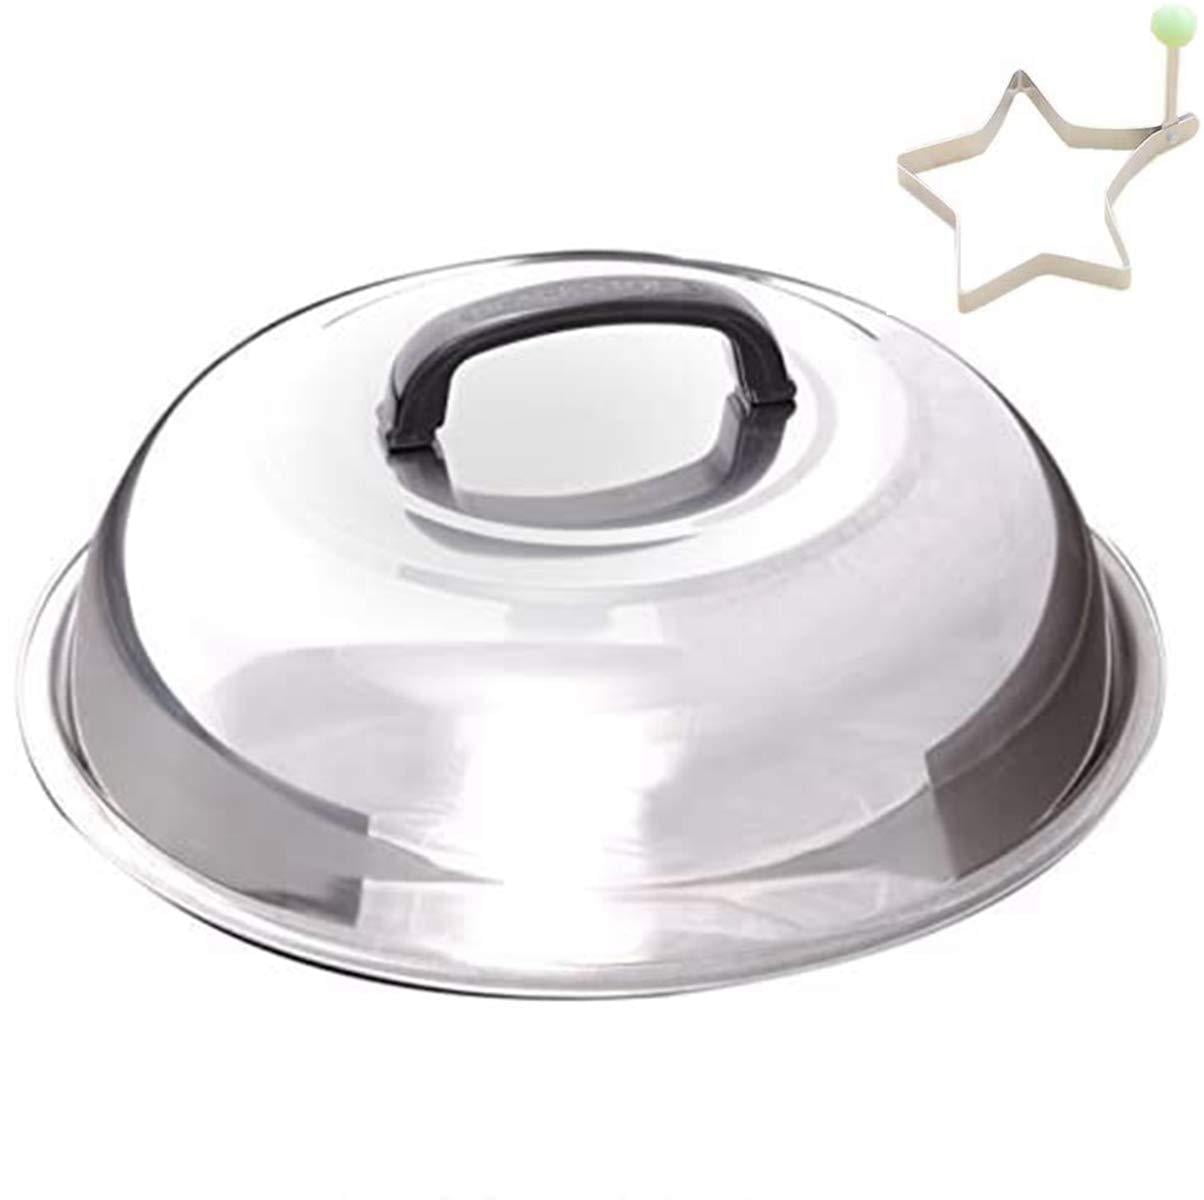 Bellemain Griddle Accessories Cheese Melting Dome Round Basting Cover Stainless 